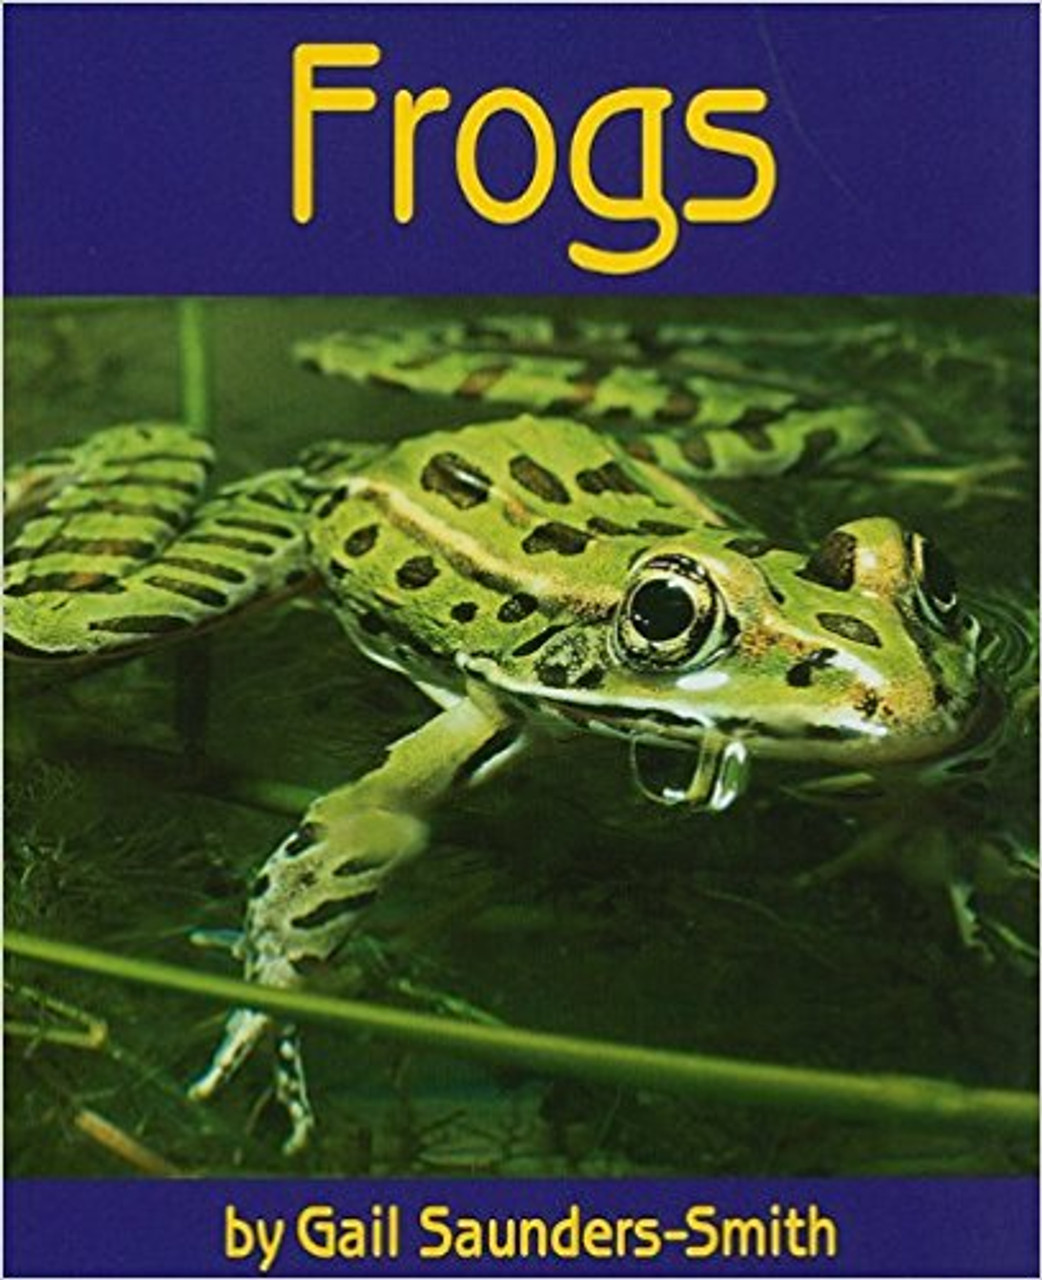 Frogs by Gail Saundes-Smith